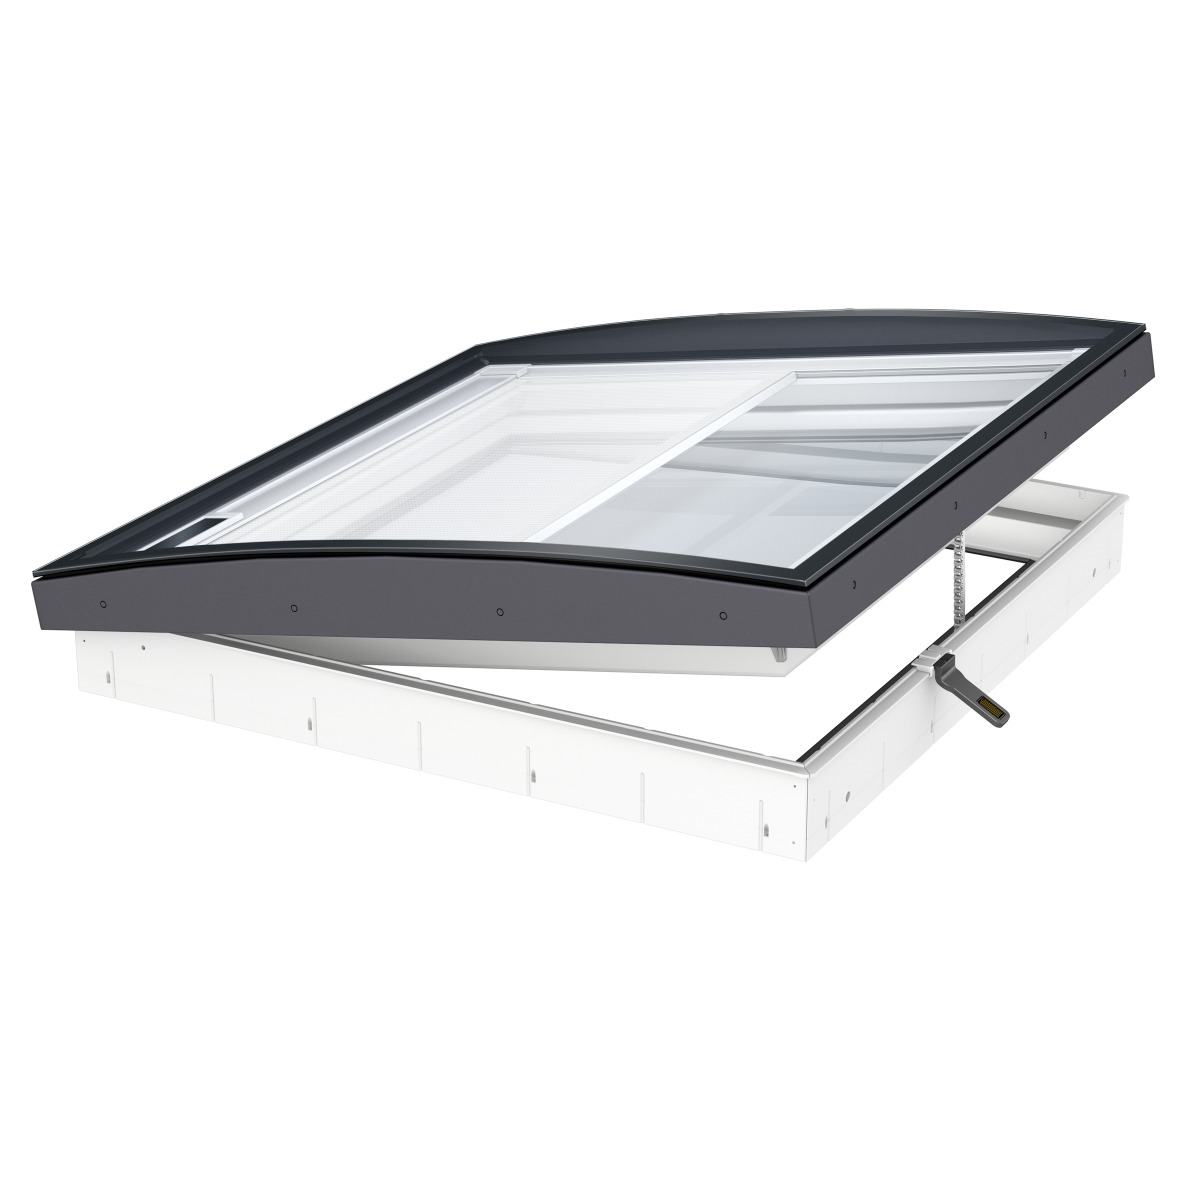 VELUX curved glass roof window